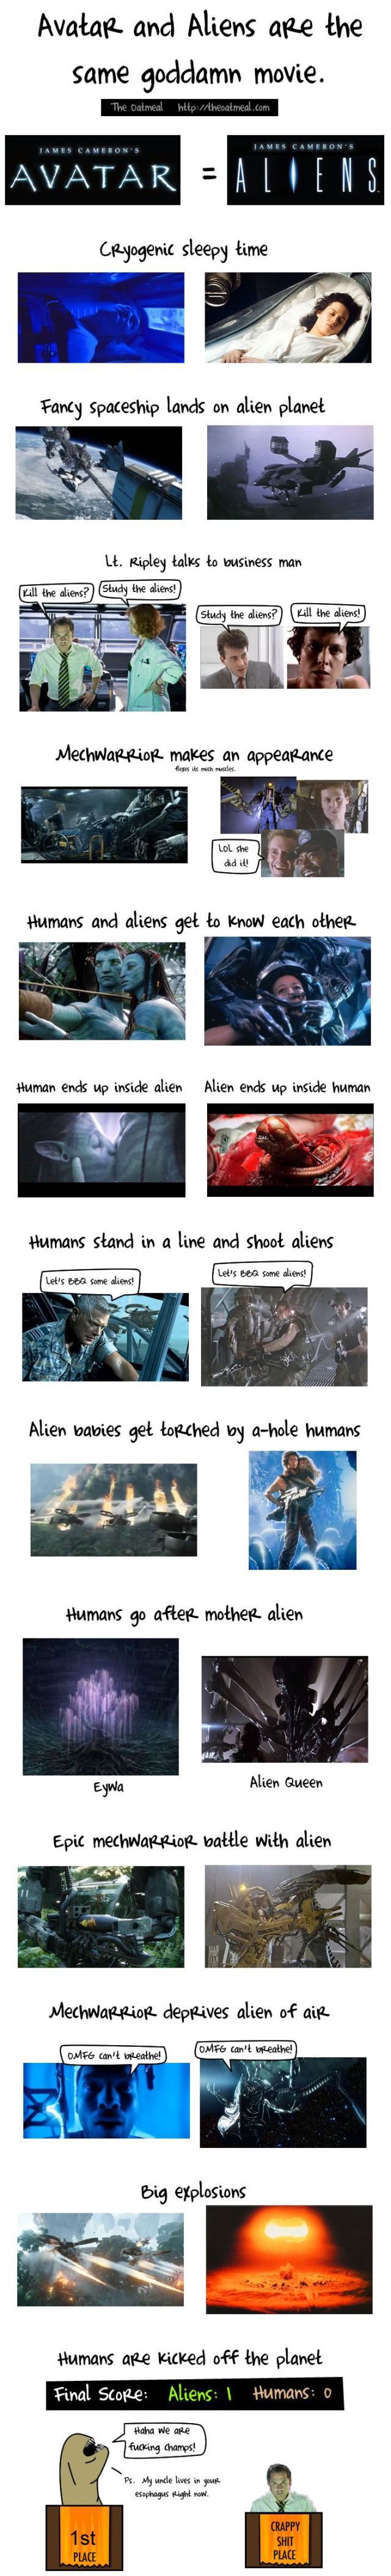 Avatar and Aliens Are Pretty Much the Same Movie (1 pic)